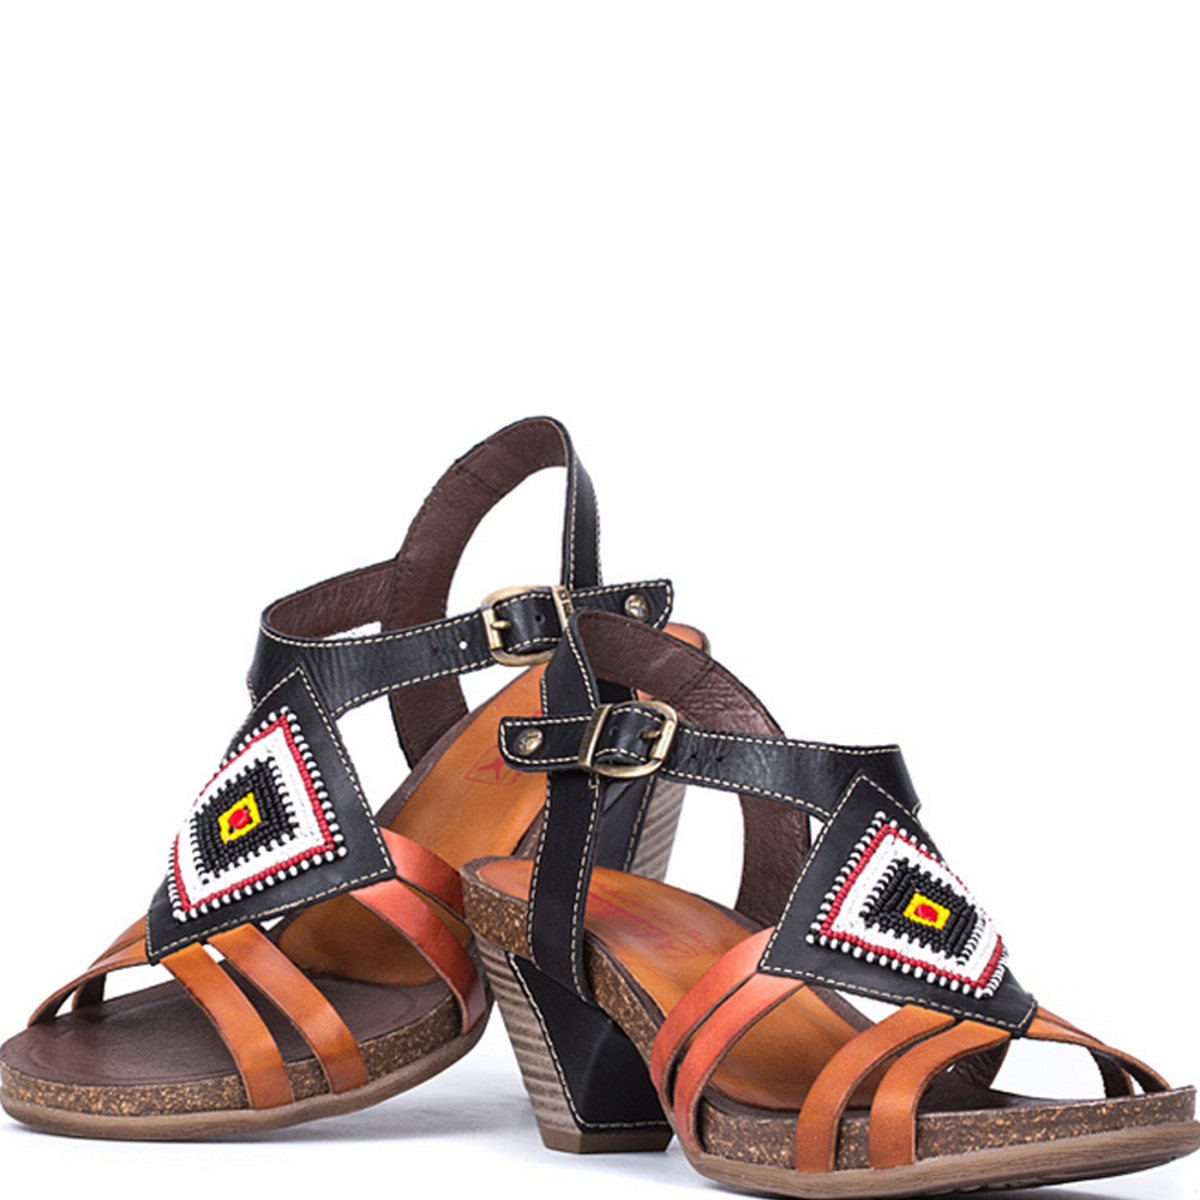 Fashion Elegant Ethiopian/Maasai CAMELS HIDE PURE LEATHER OPEN  SHOES/SANDALS. price from jumia in Kenya - Yaoota!